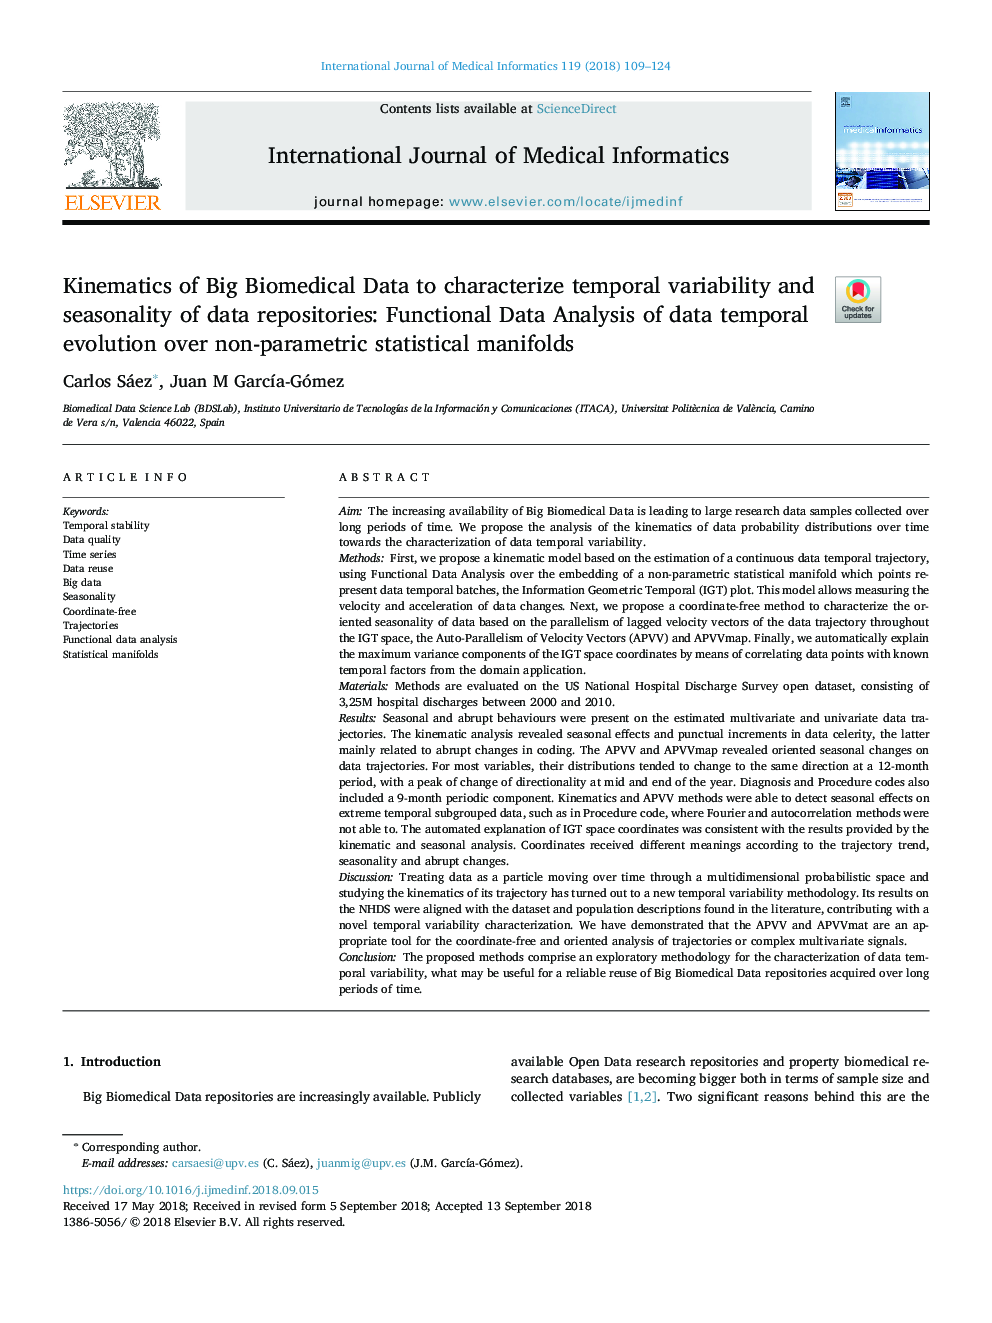 Kinematics of Big Biomedical Data to characterize temporal variability and seasonality of data repositories: Functional Data Analysis of data temporal evolution over non-parametric statistical manifolds